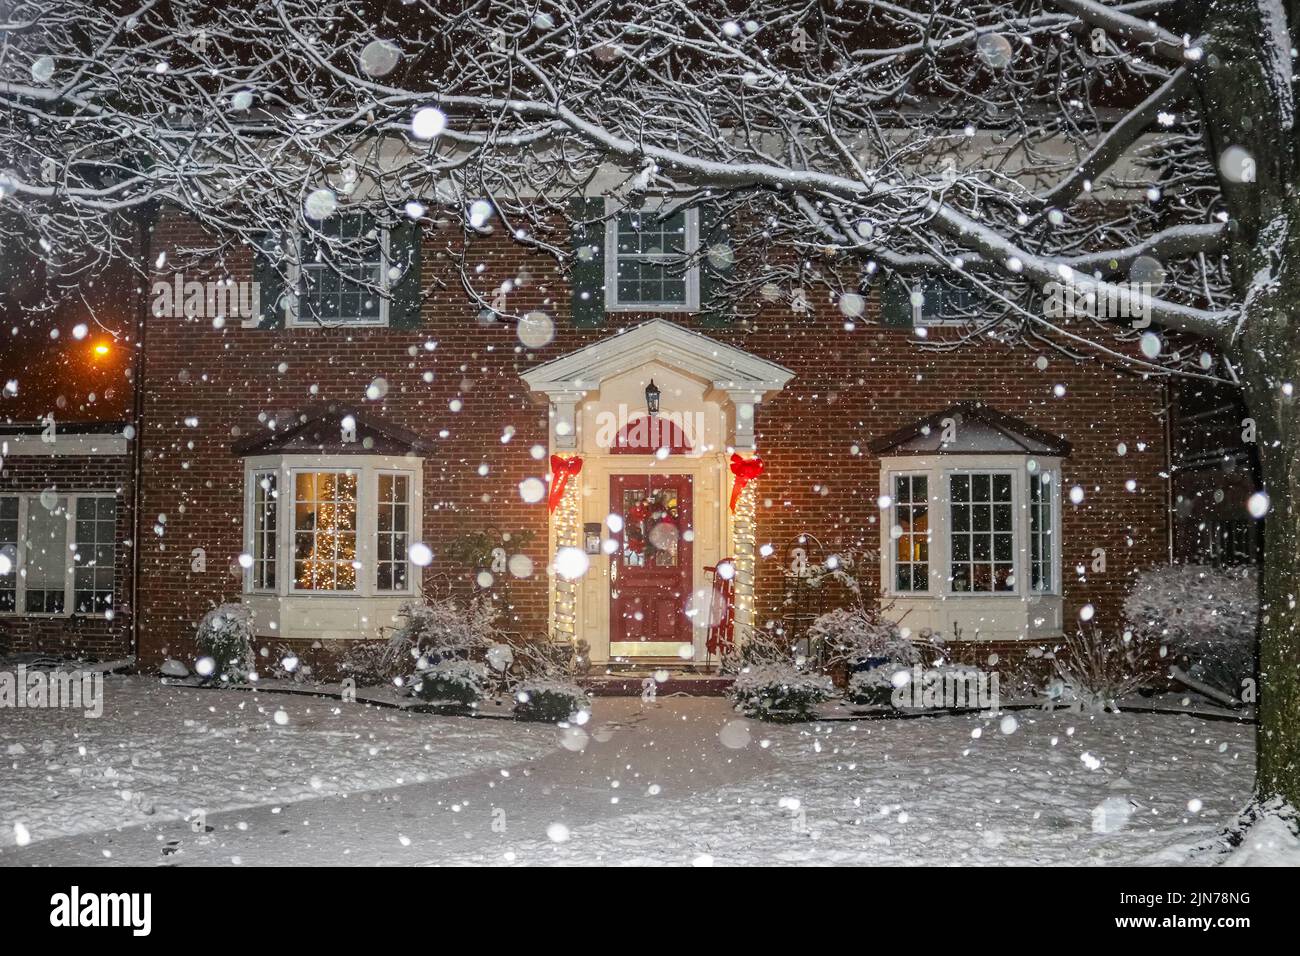 Snowfall on beautiful brick house with columns and bay windows with Christmas tree light up and red sled and wreath on porch Stock Photo